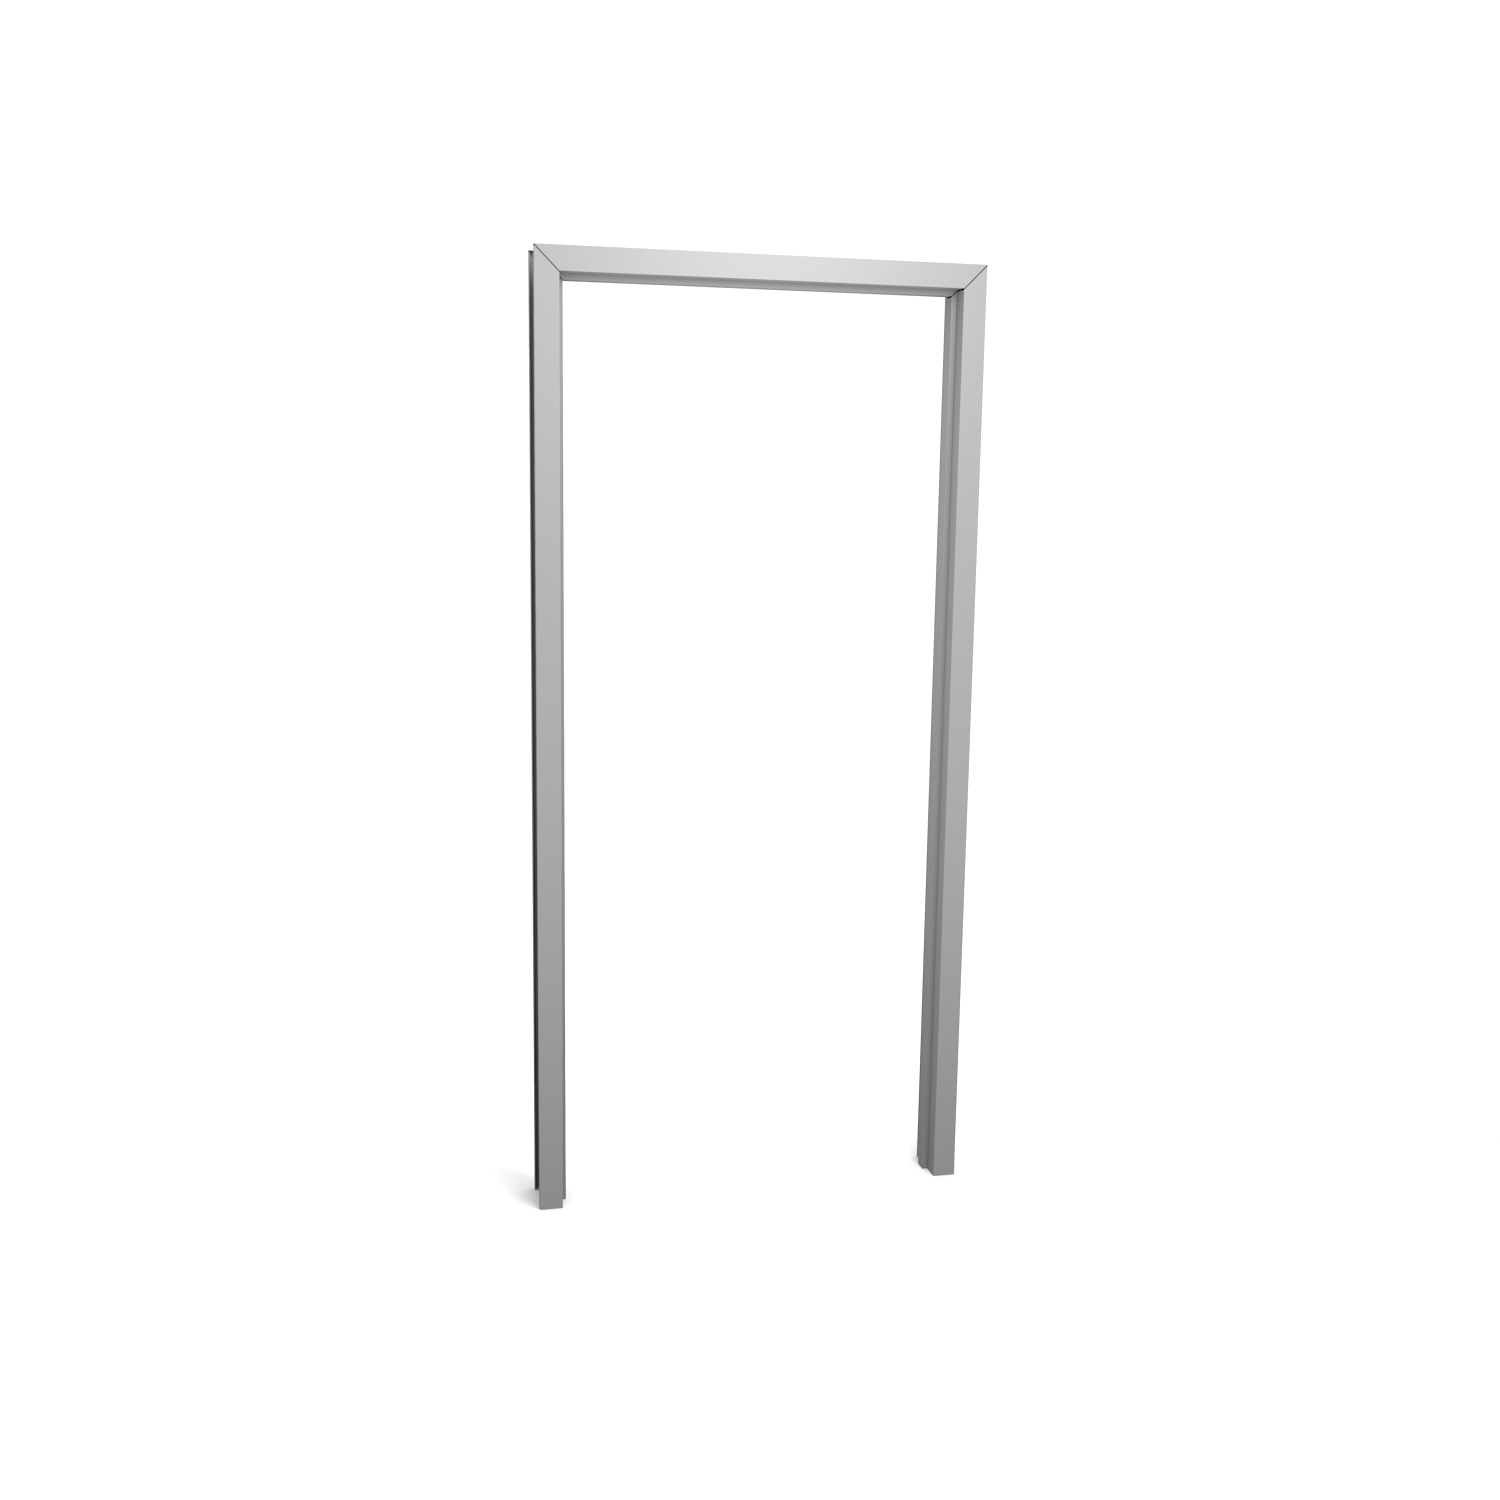 Commercial Hollow Metal Frame, 3'0 x 6'8 x 5 5/8"